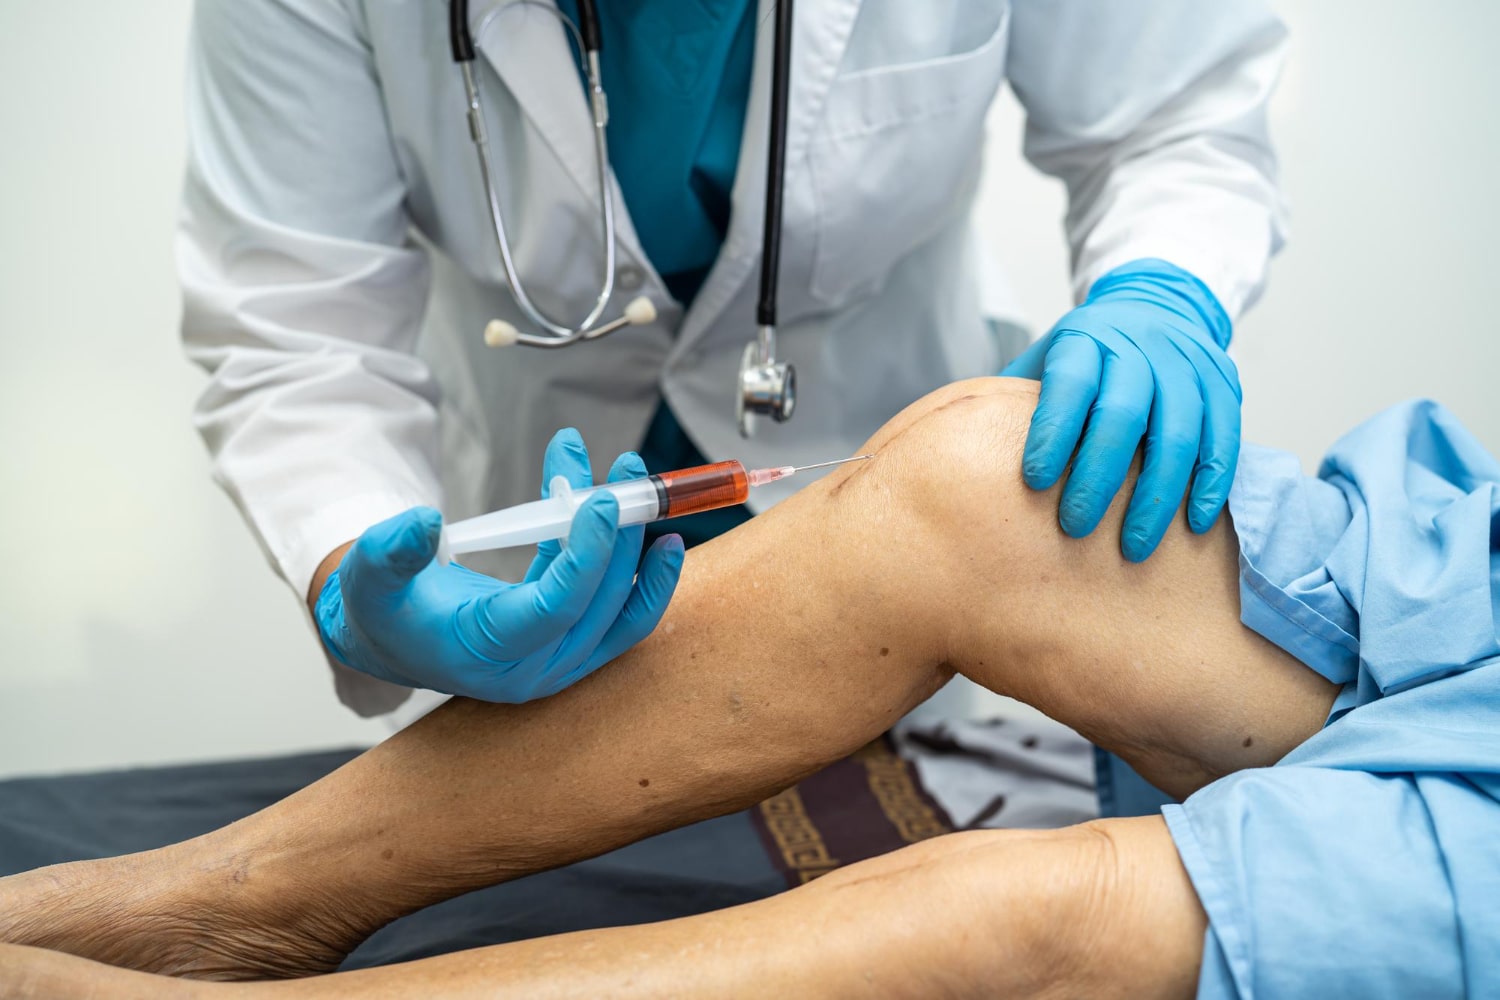 A medical professional administering platelet-rich plasma injection as part of ligament injuries.